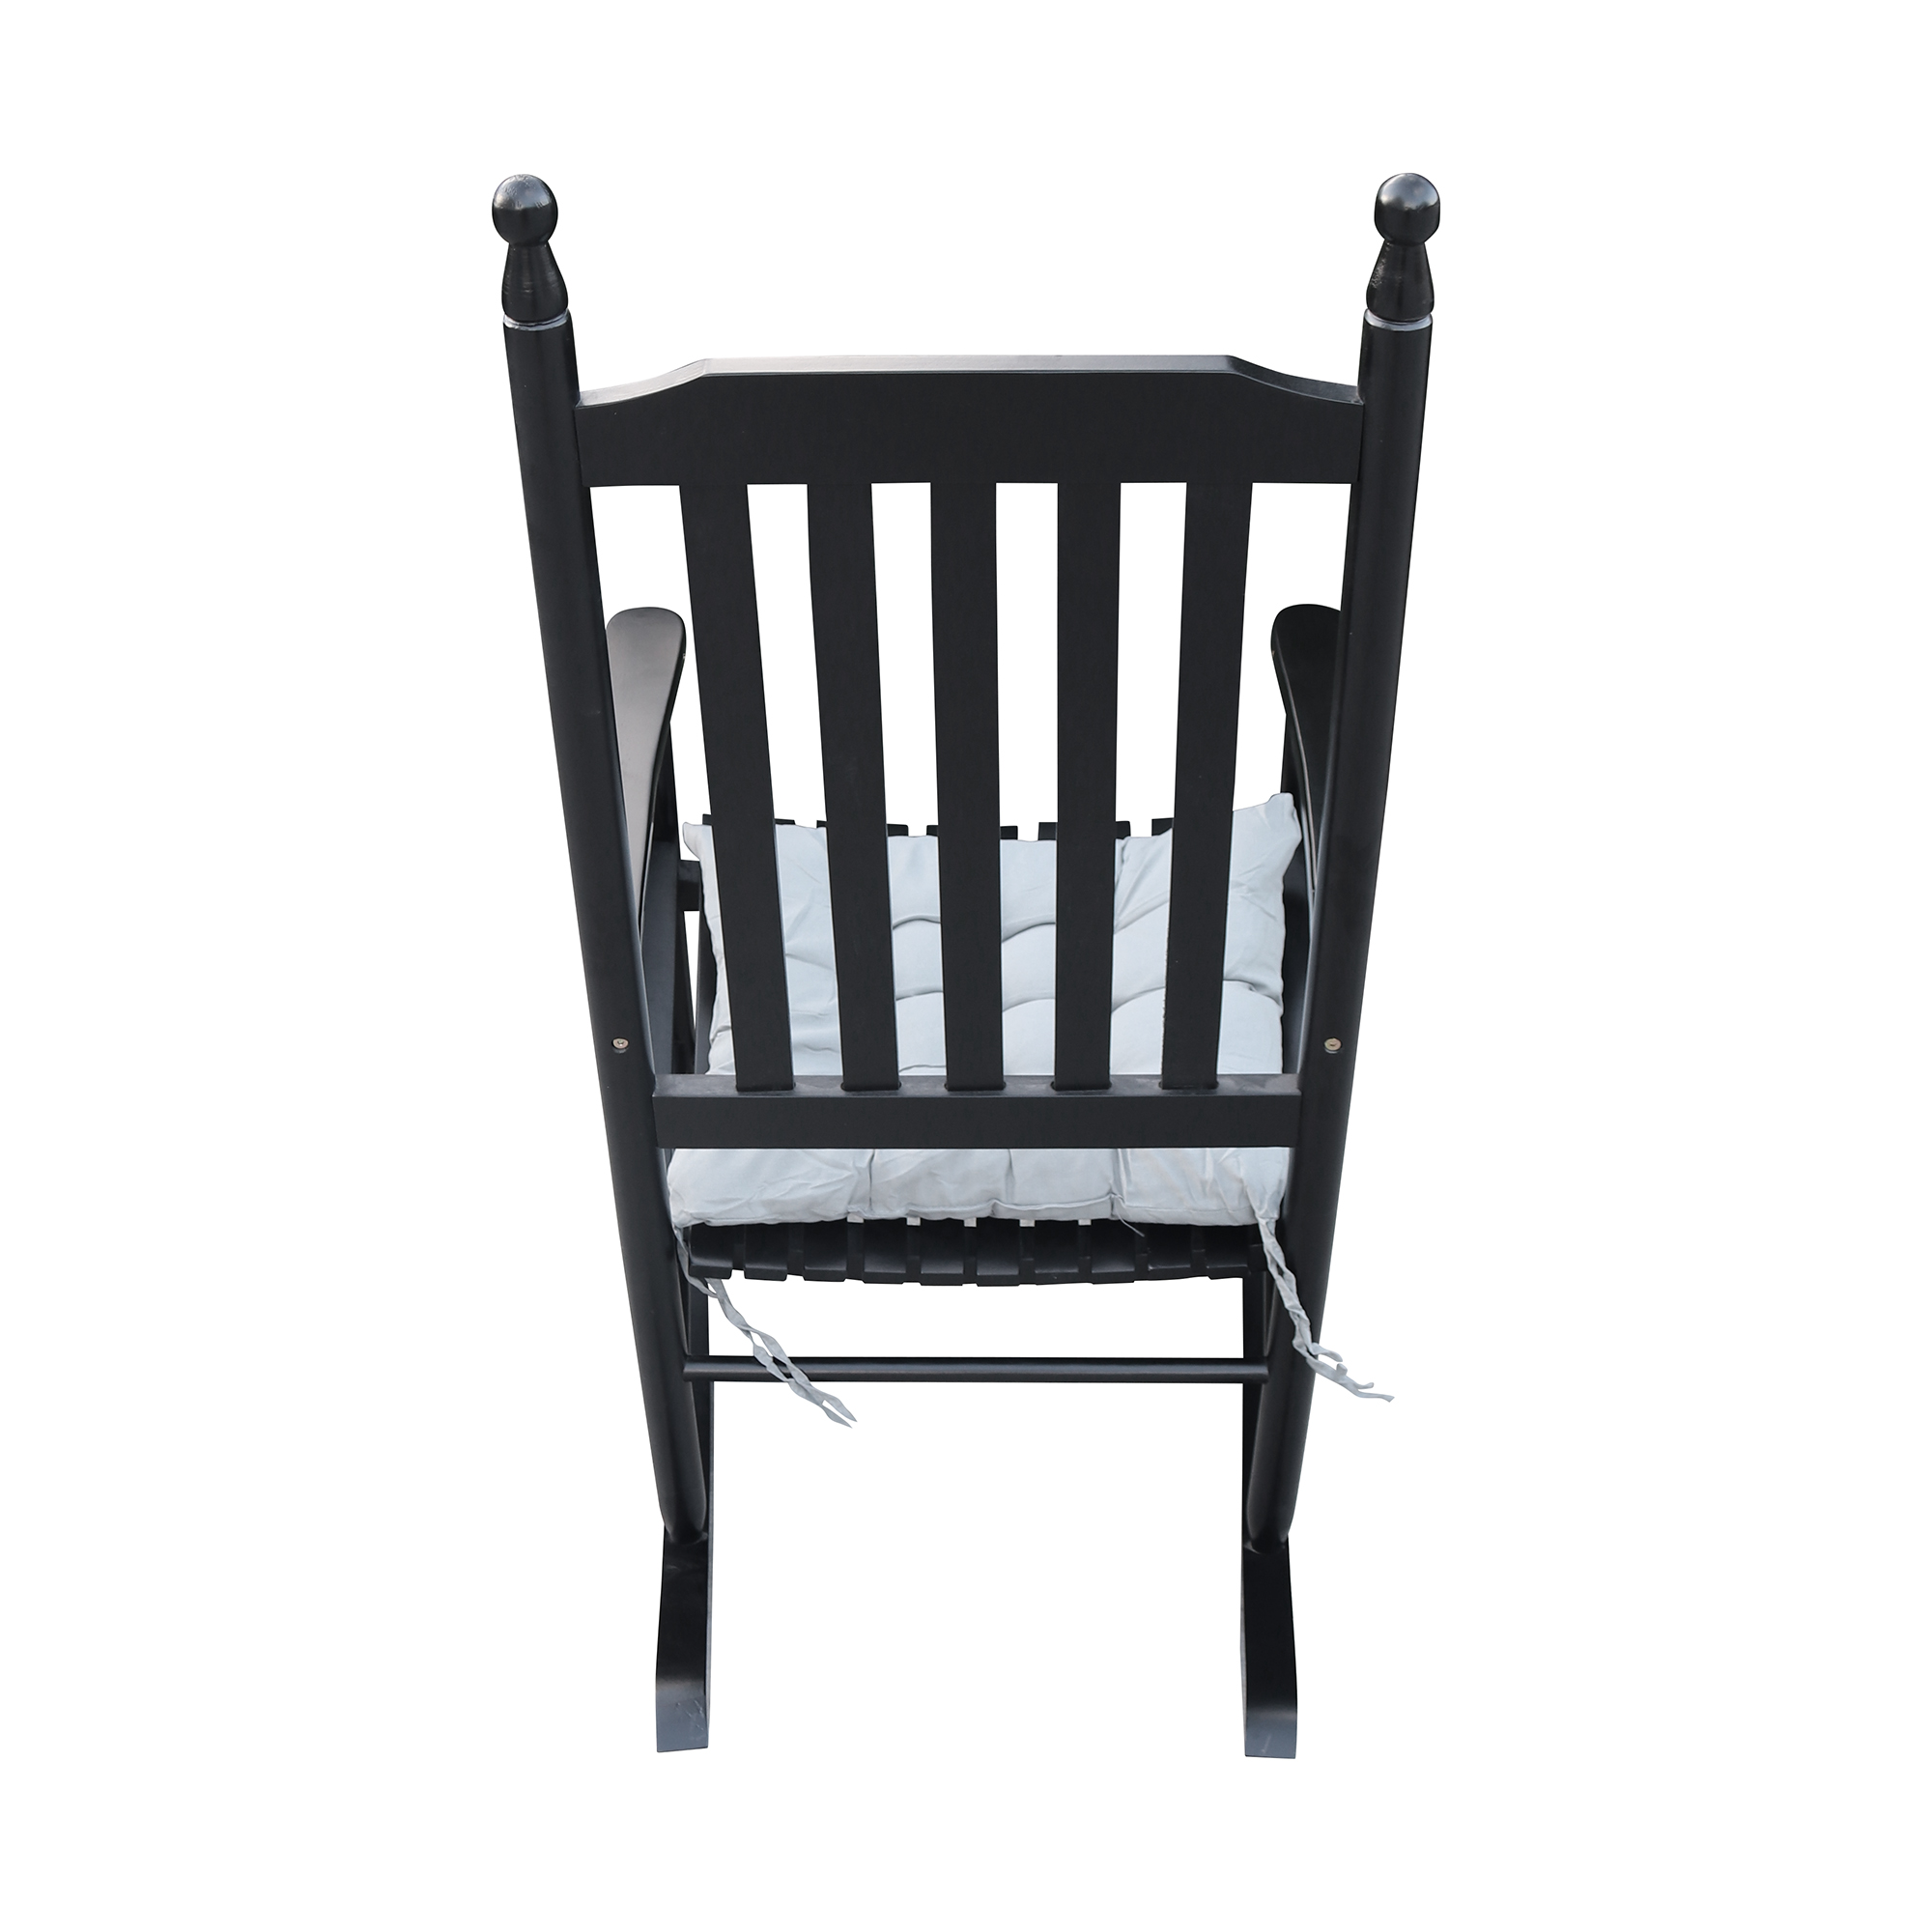 Rocking Chair for Outdoor, Wooden Patio Porch Rocker Chair with Back Support, Ergonomic Wooden Rocking Chair for Patio Porch Backyard, Rocking Bistro Chair Patio Chairs, Max 280lbs, Black, A1592 - image 4 of 7